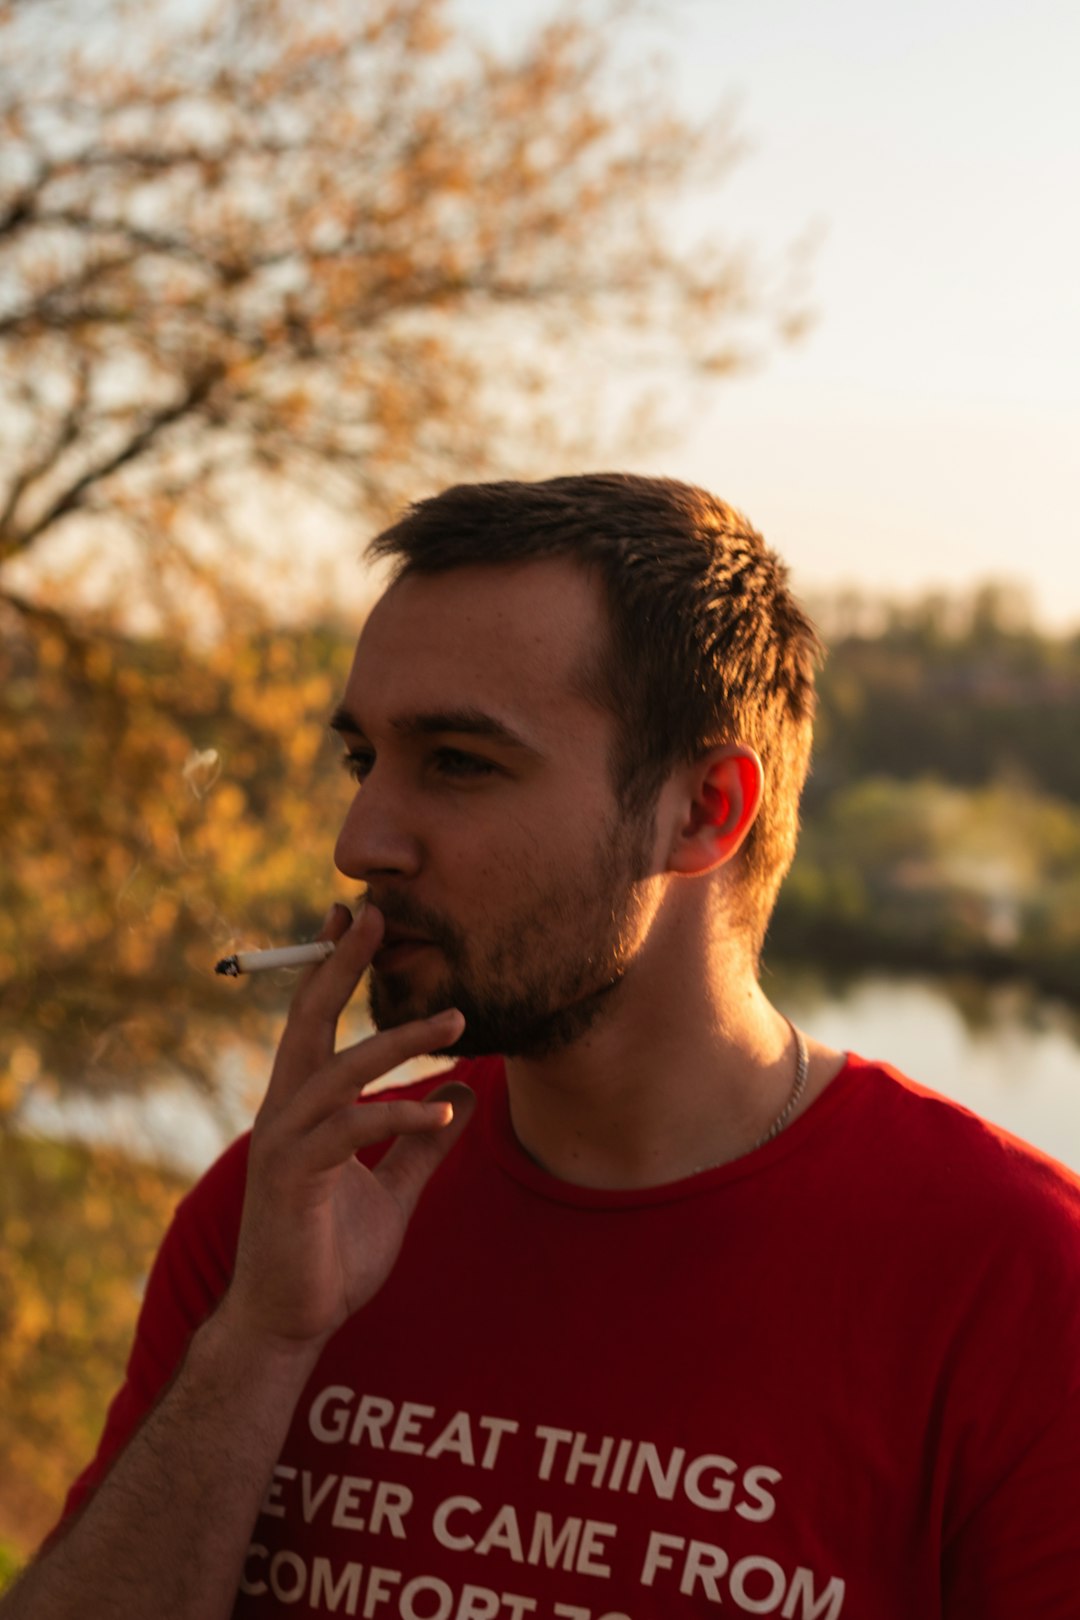 man standing smoking cigarette near body of water and trees